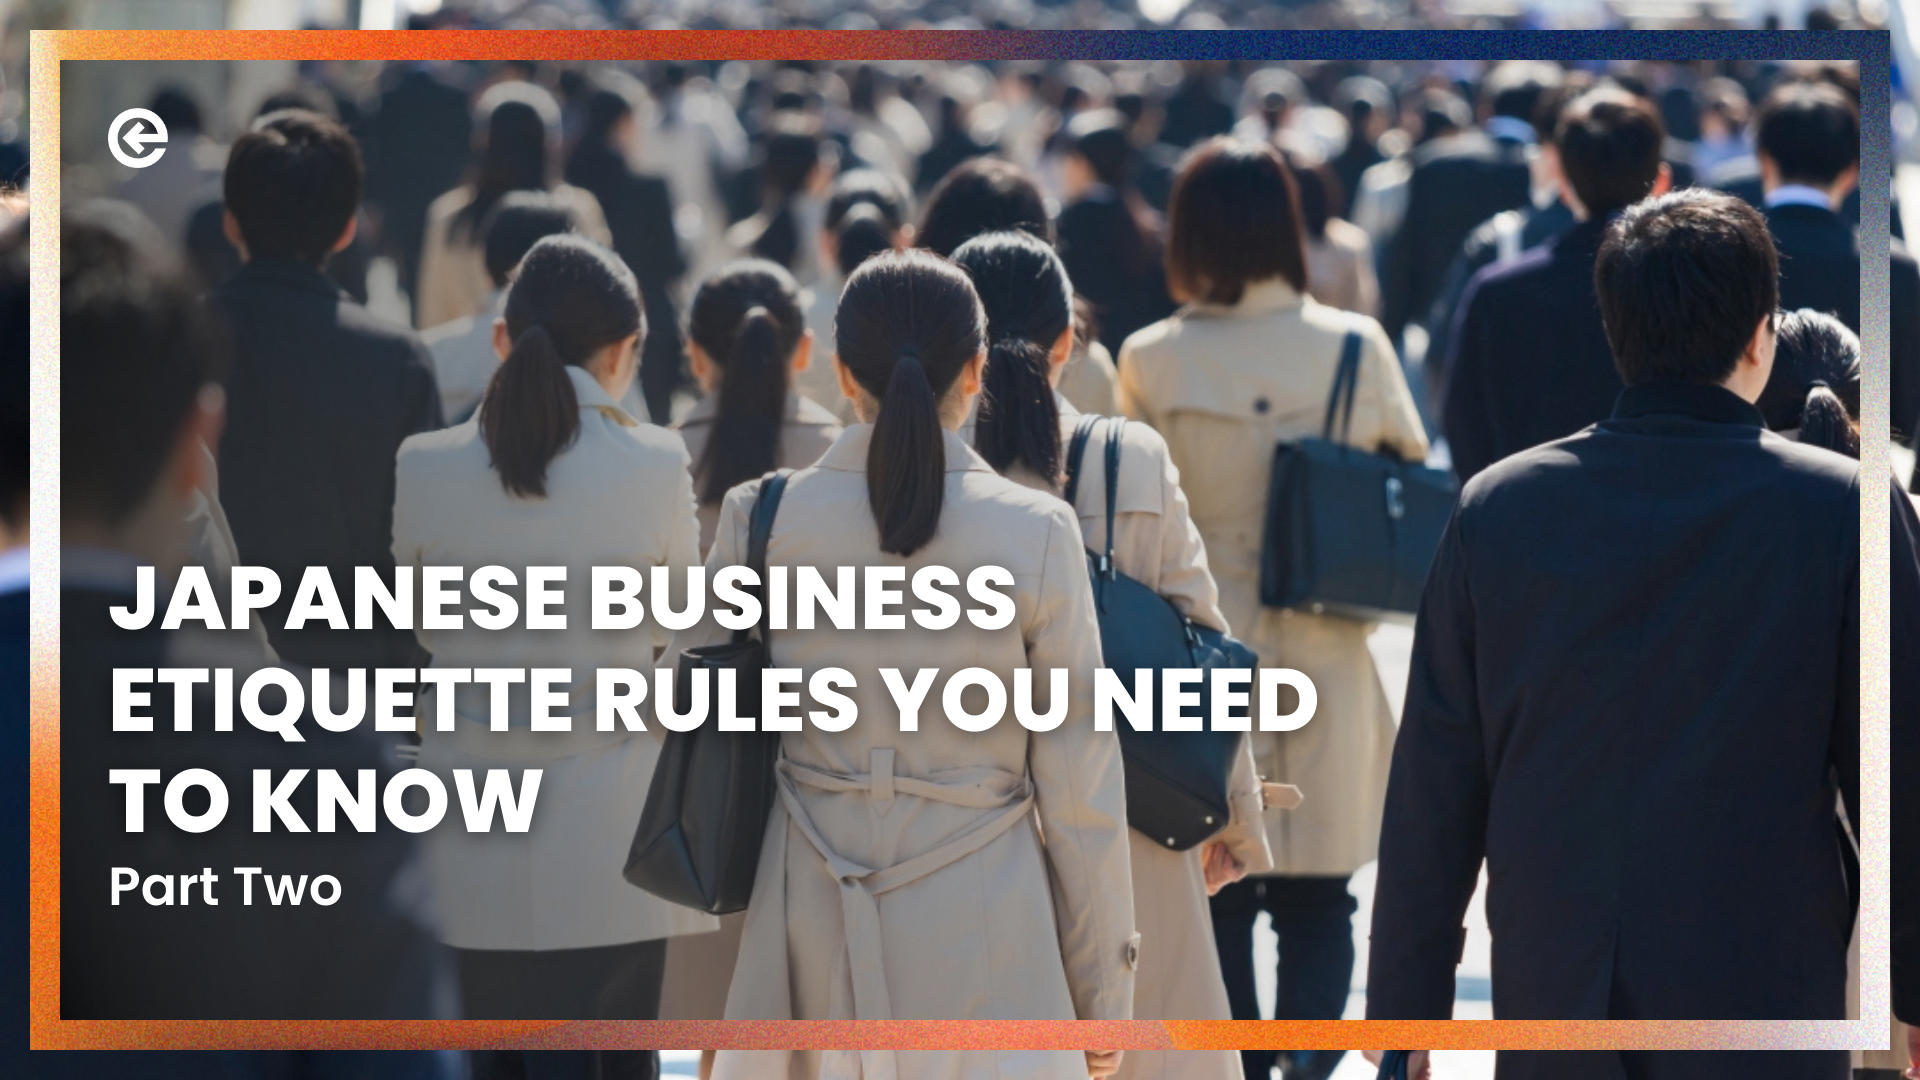 Doing Business In Japan: Important Etiquette Rules You Need To Know